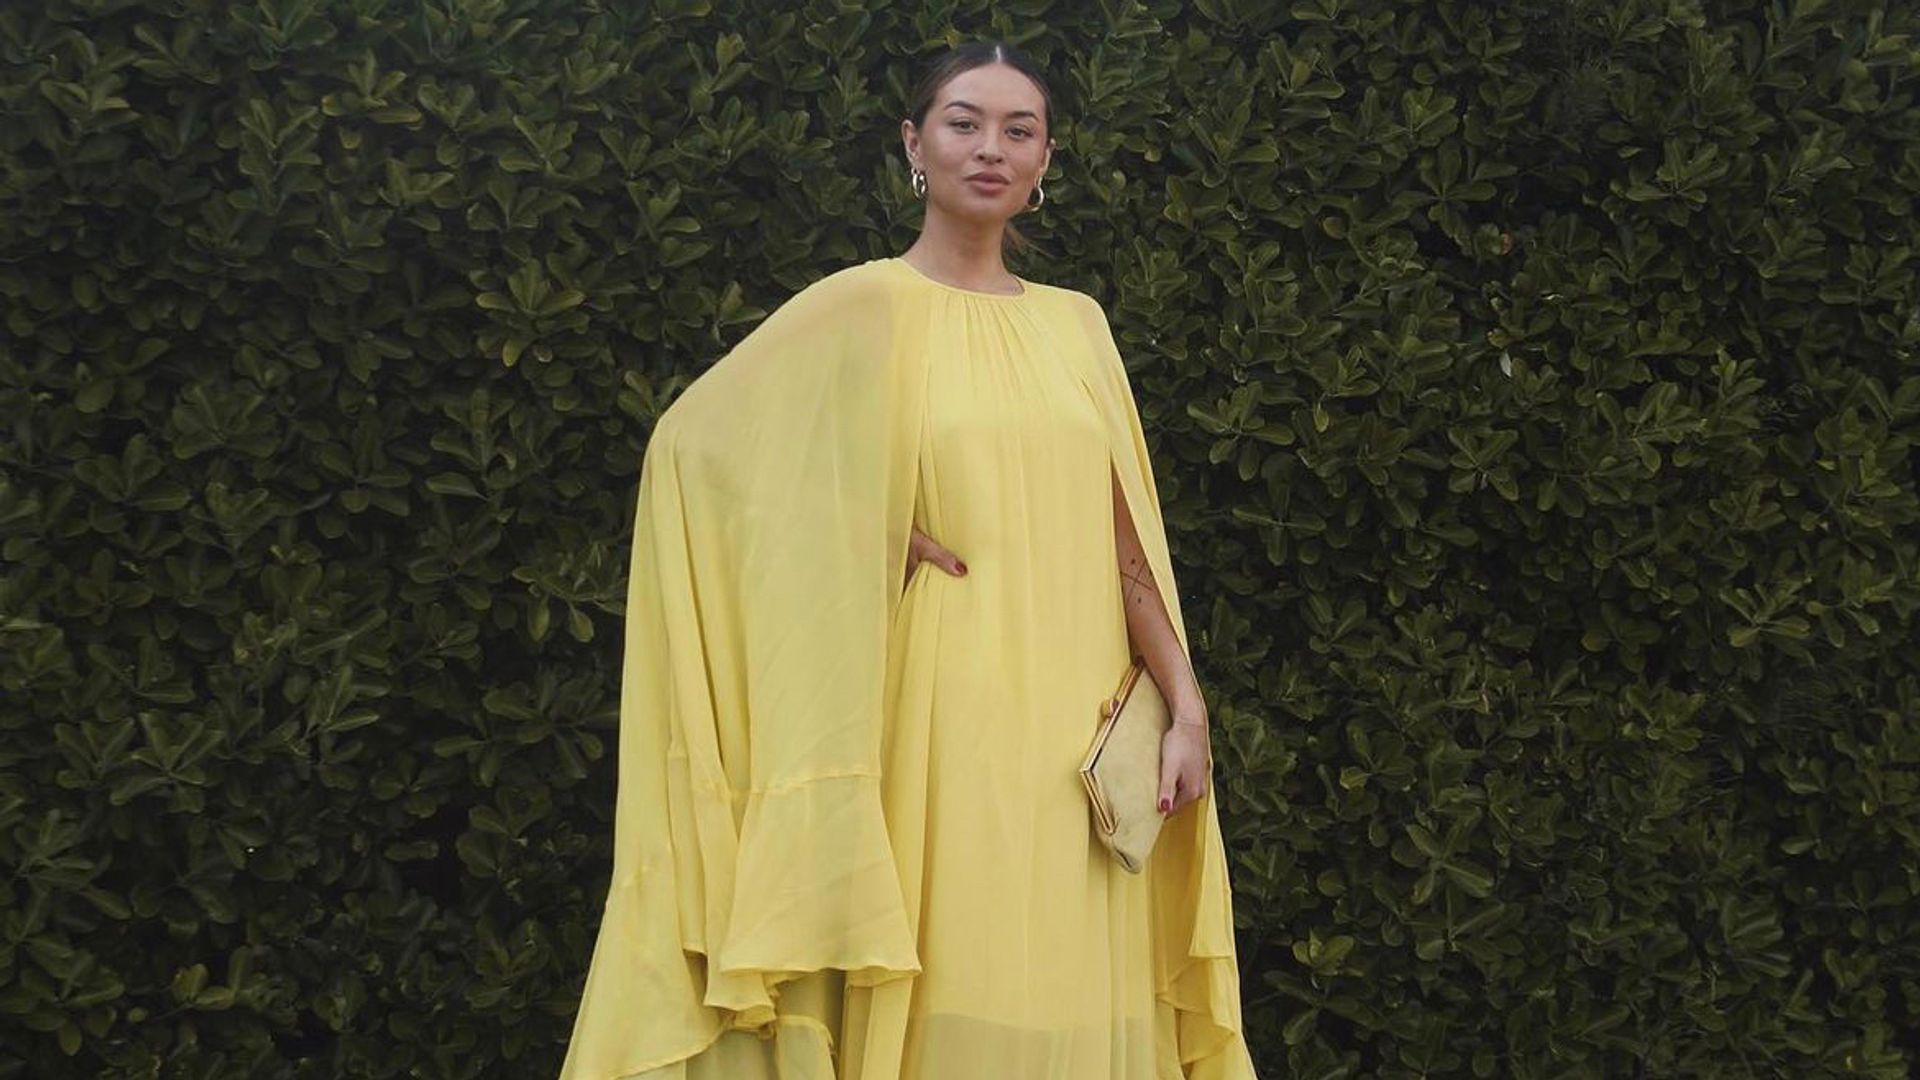 Vanessa Blair wearing a yellow gown 